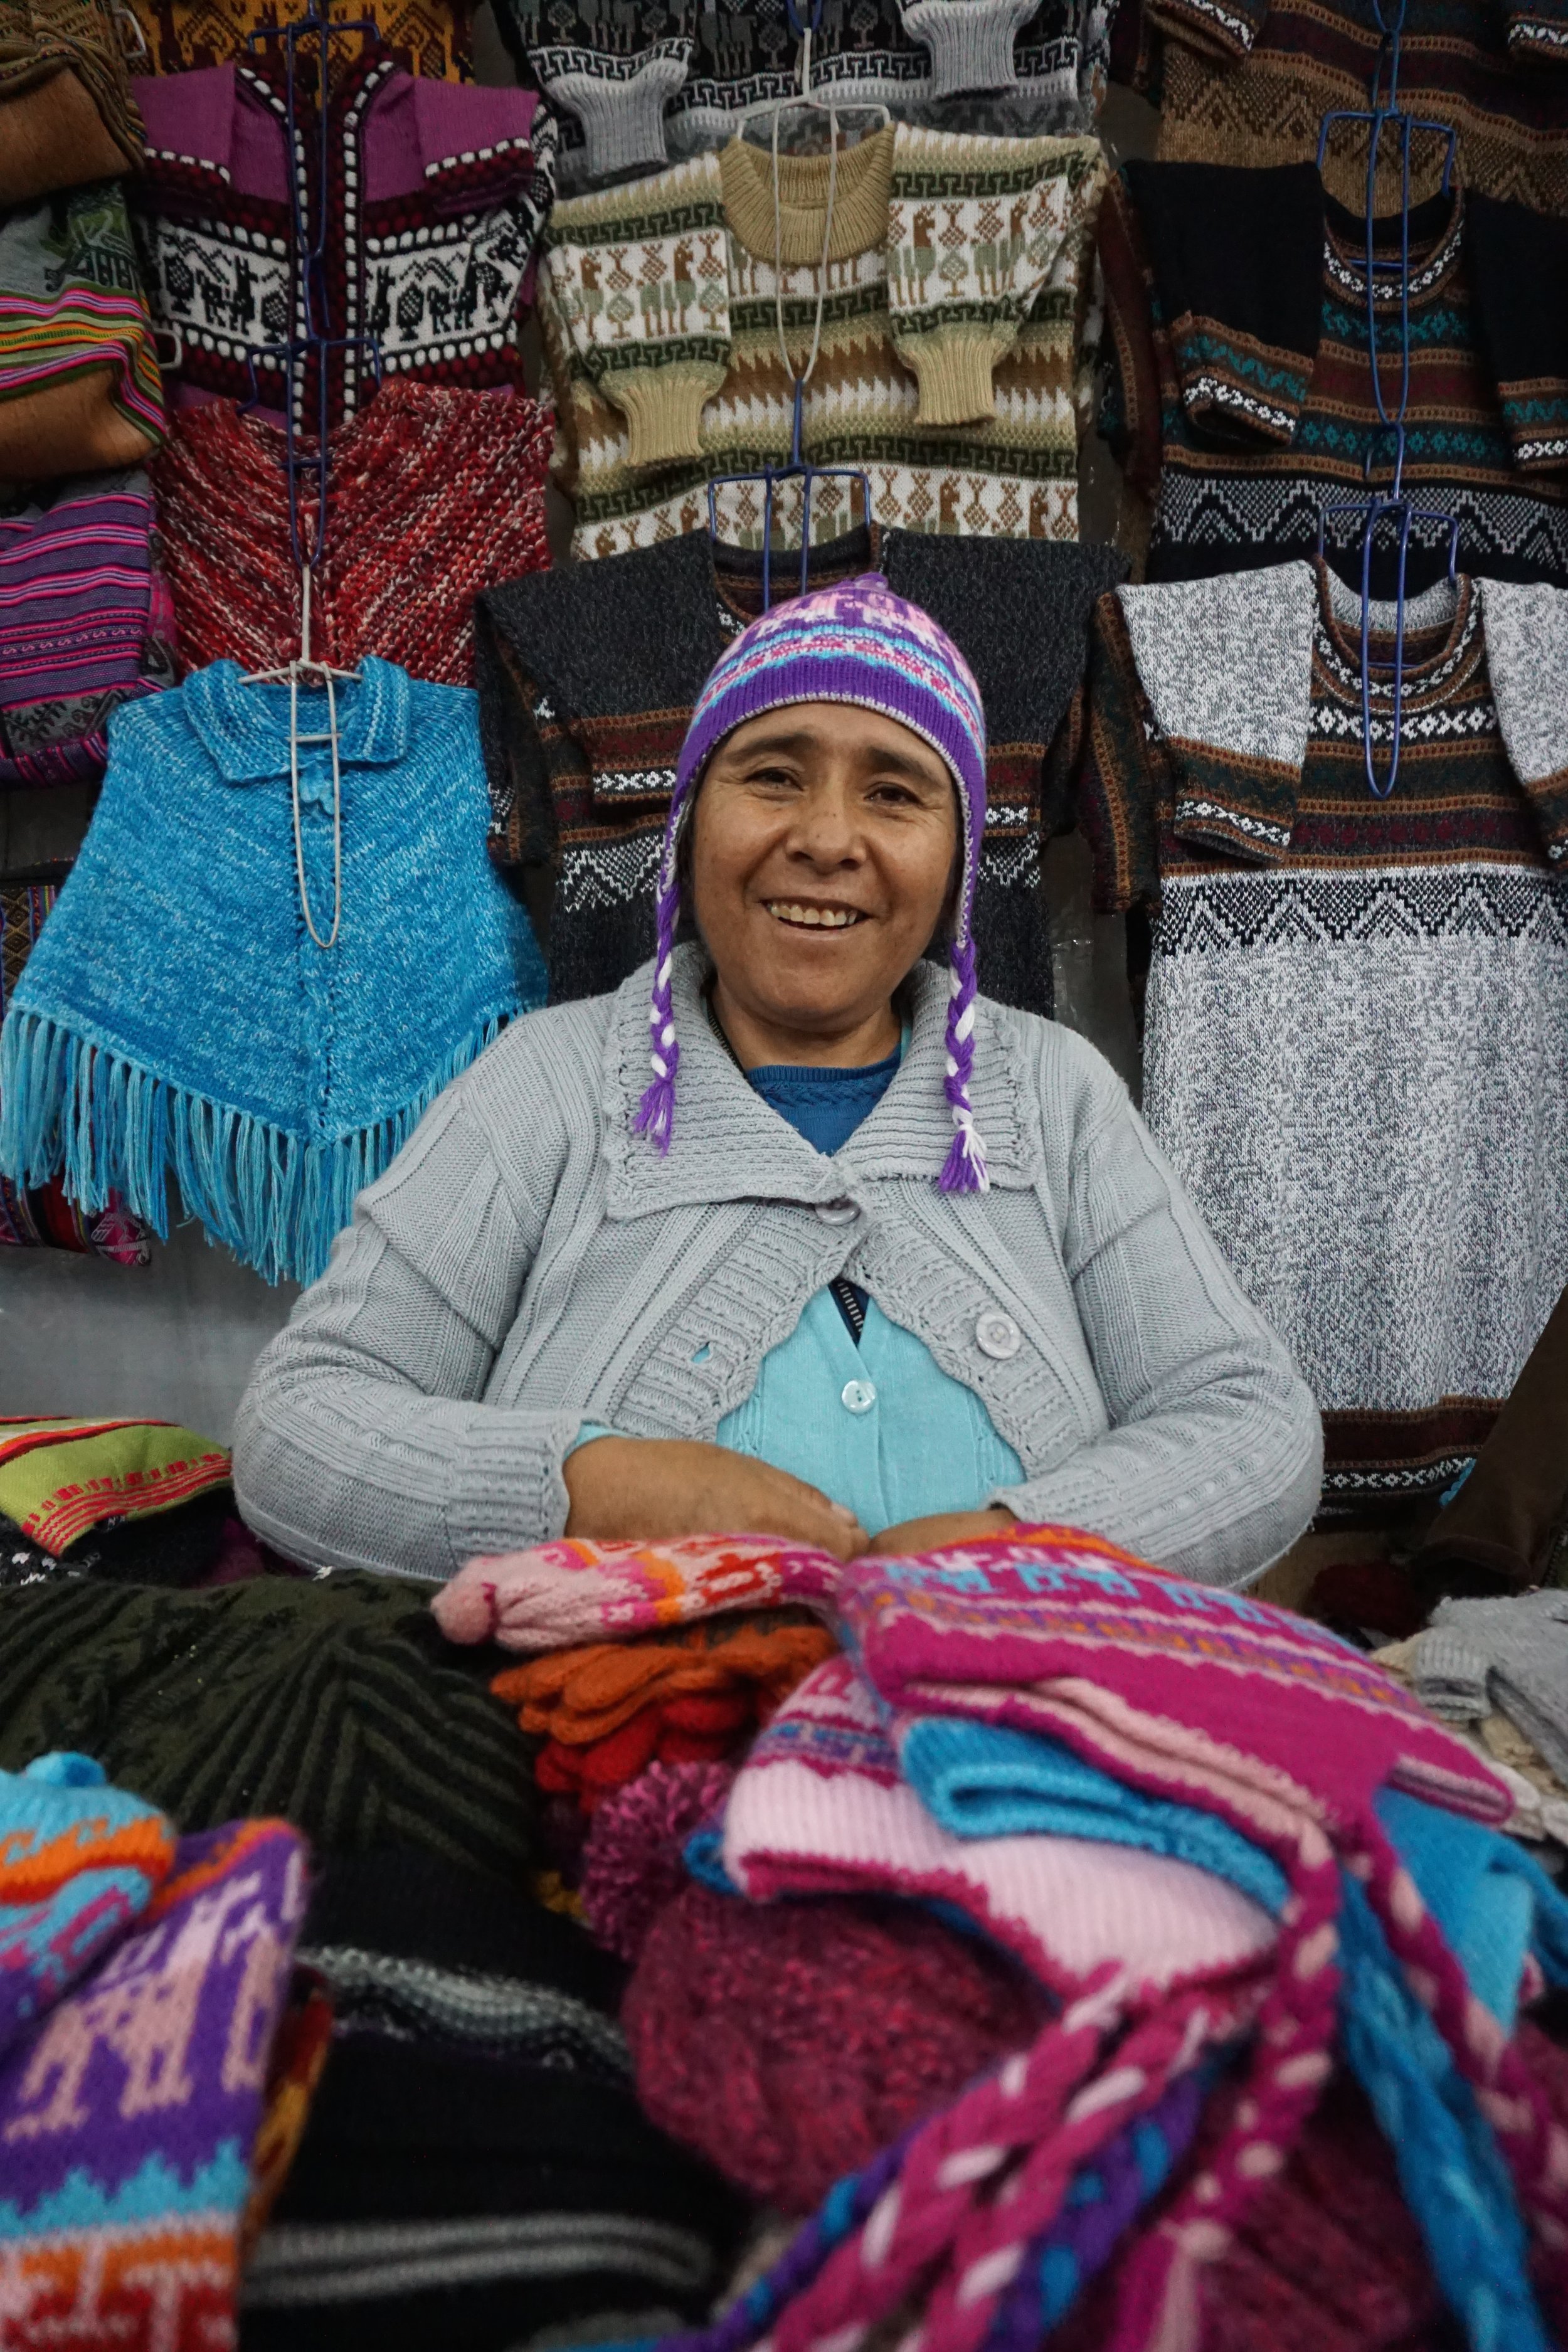  Arequipa is said to be among the best places in Peru to buy hand-made alpaca wool items. We visited an artisan market and stocked up on gifts for family. We bought a couple of hats from this friendly vendor. 